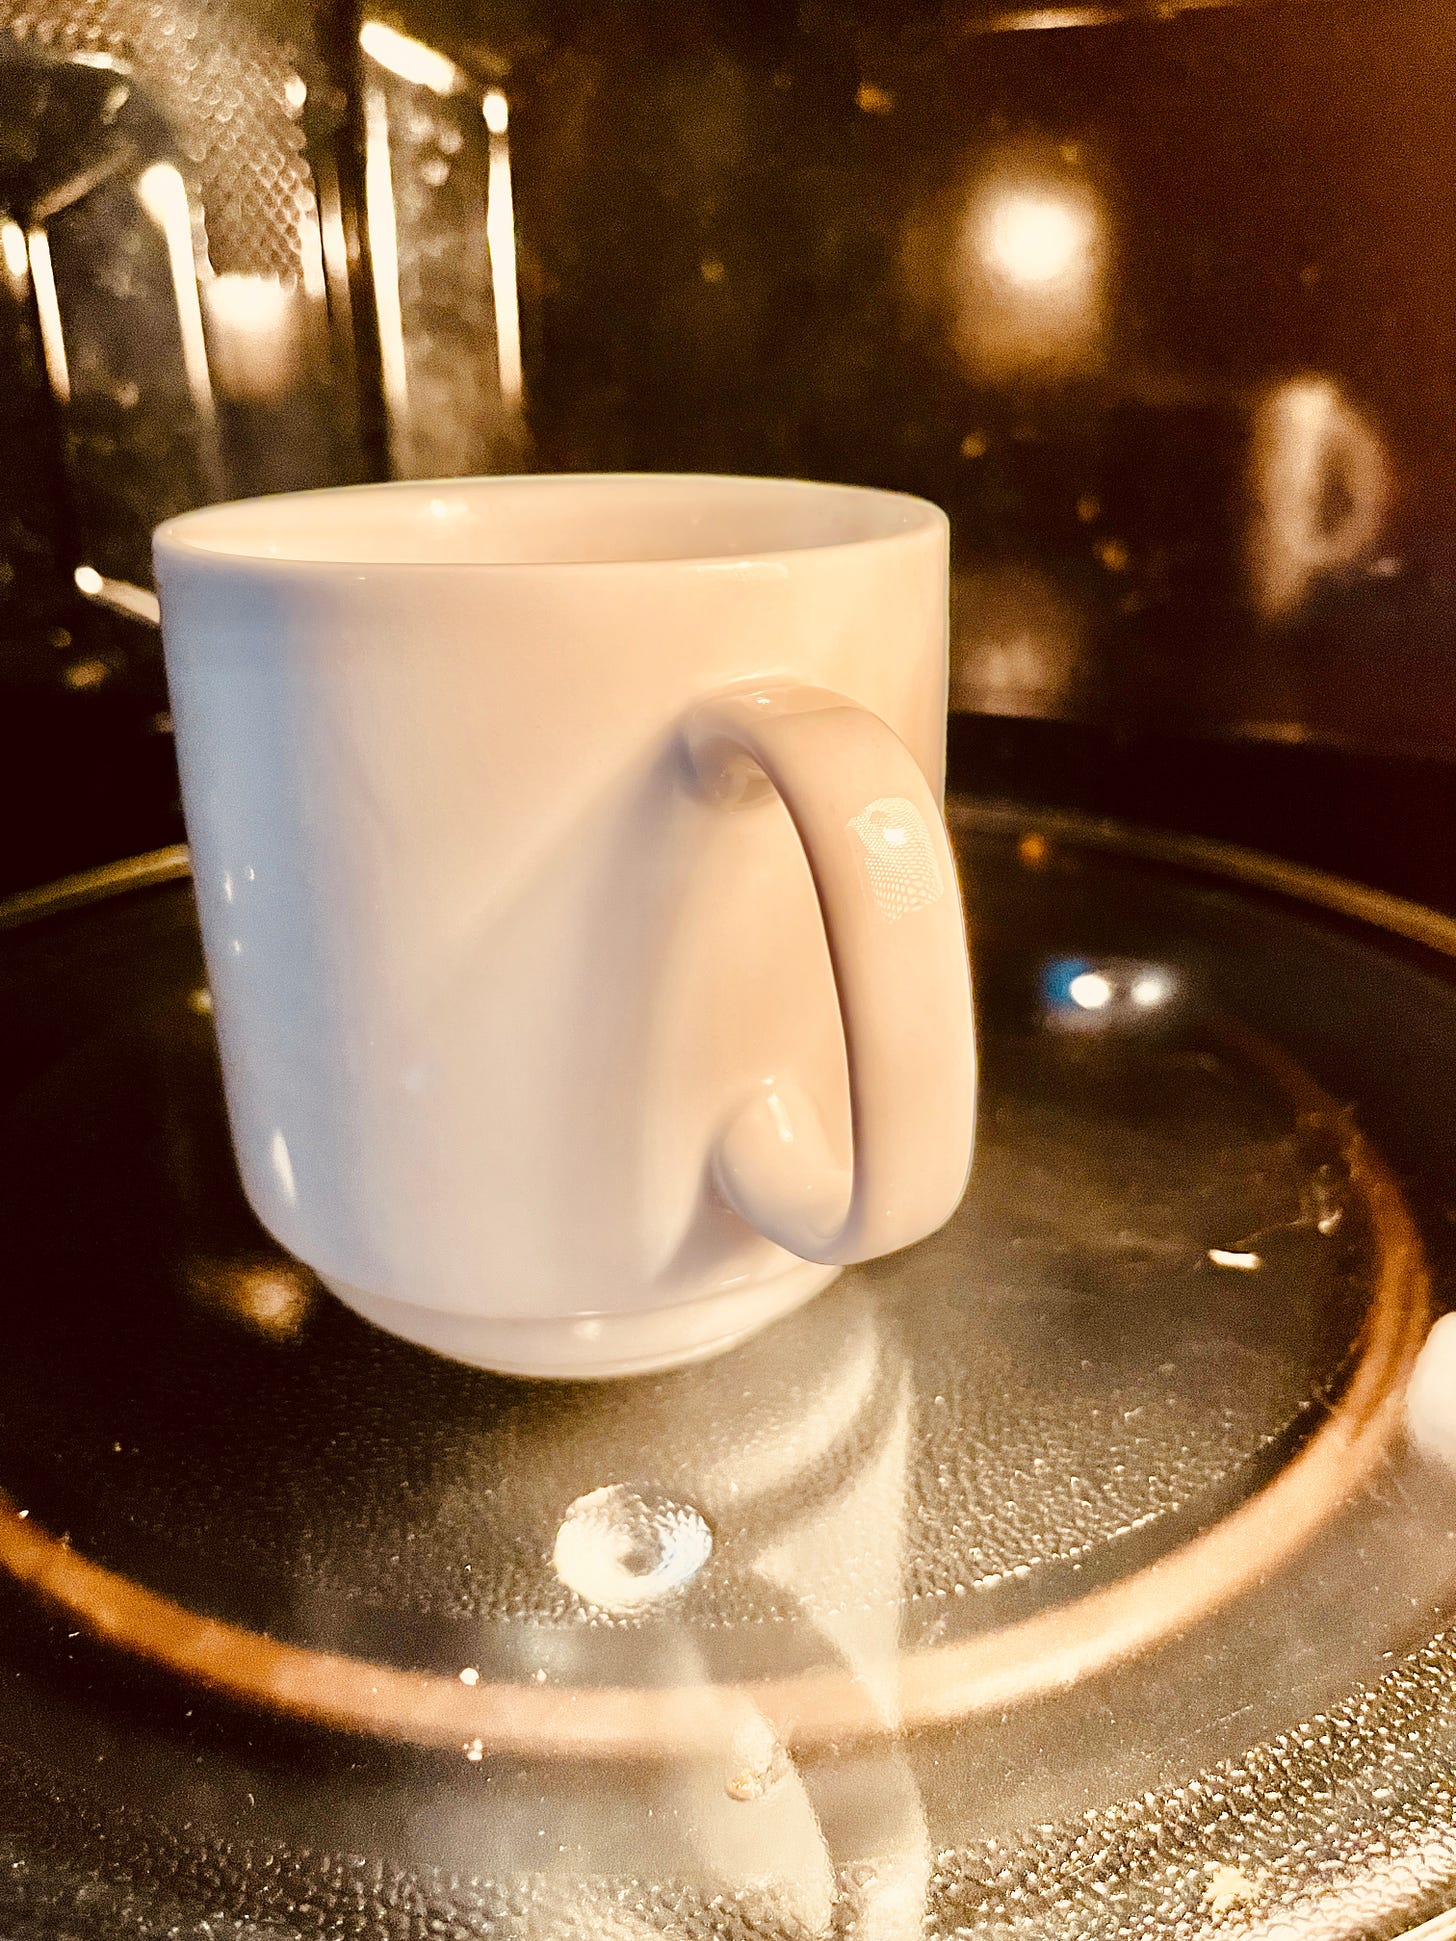 White cup of coffee in a microwave oven. Photo taken by poet/author, Tess McCarthy. 